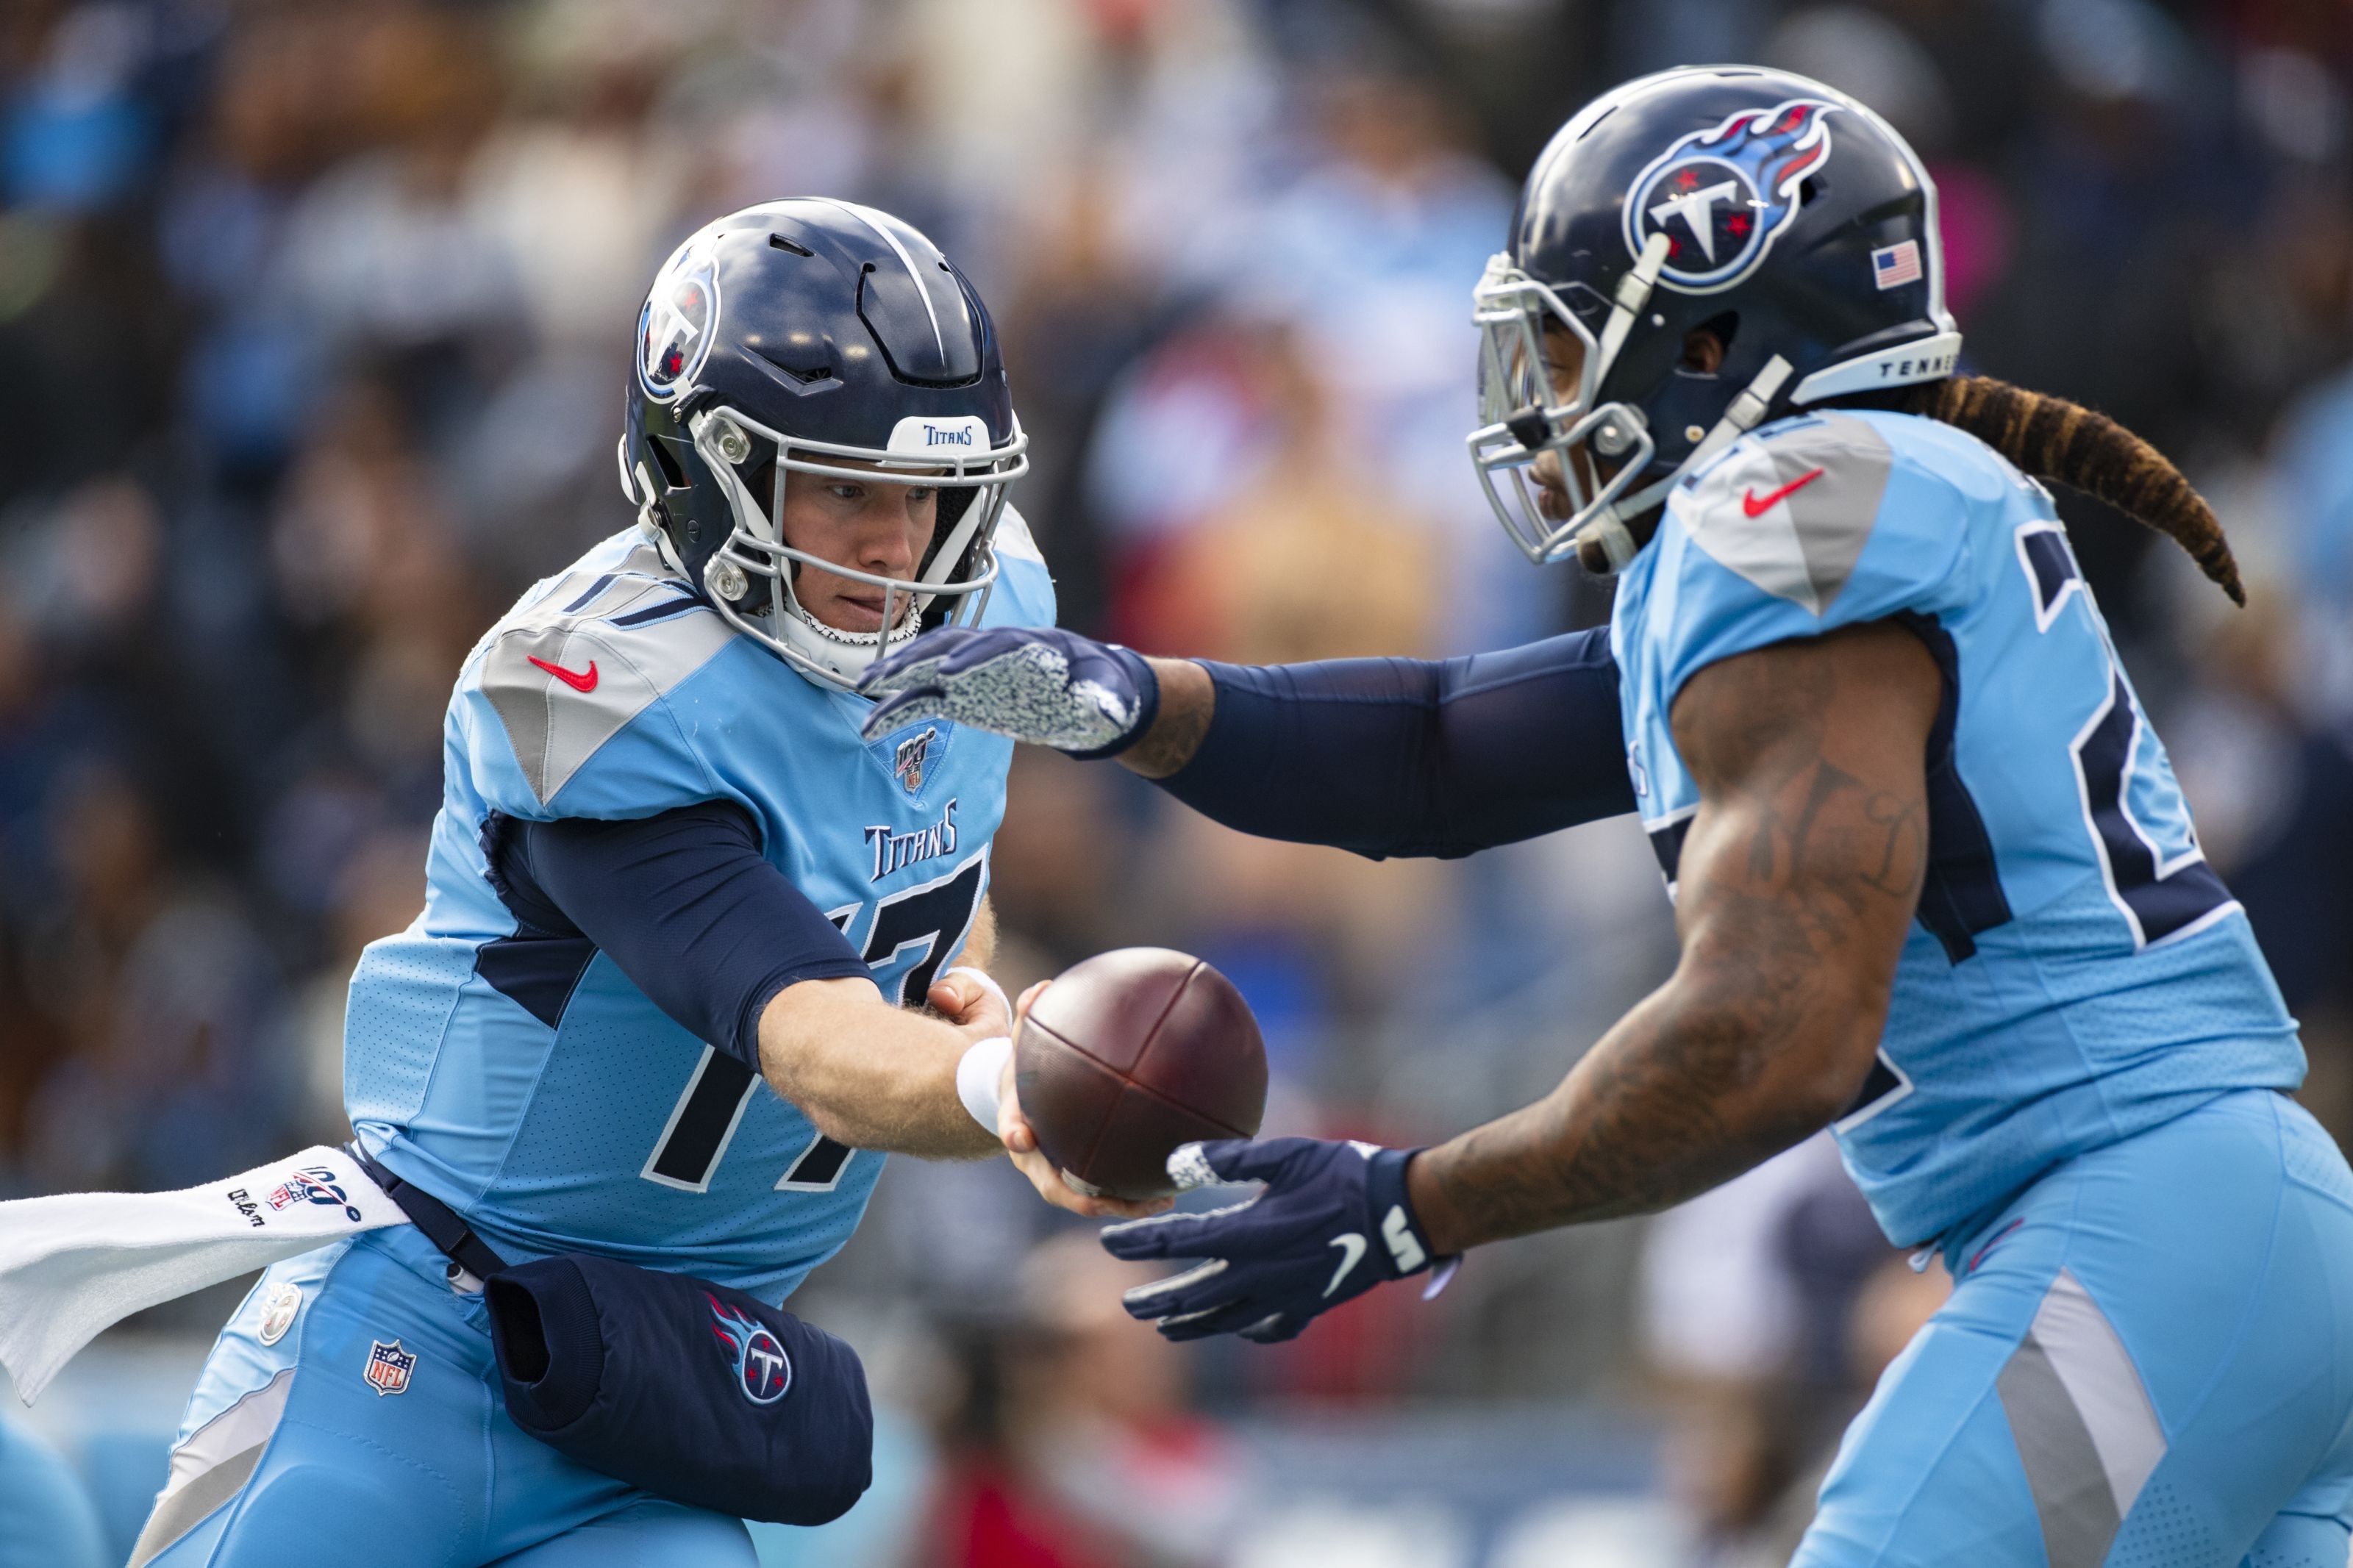 List of Tennessee Titans 2020 free agents and projected salary cap space